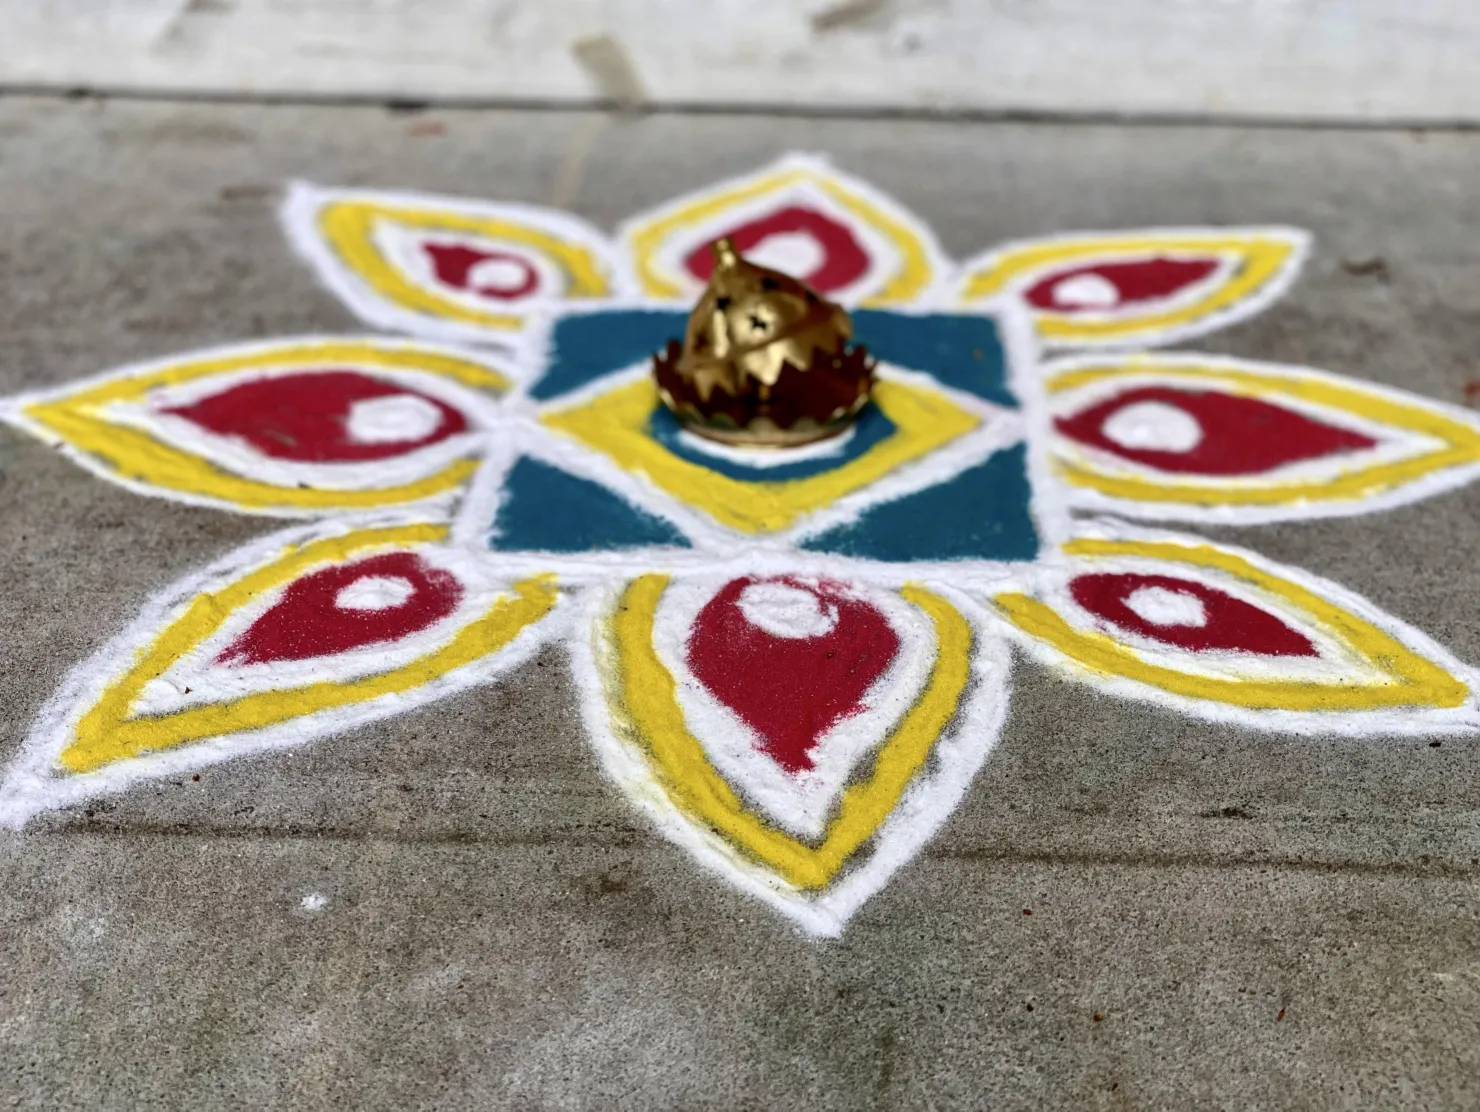 How to Make Rangoli: 11 Steps (with Pictures) - wikiHow